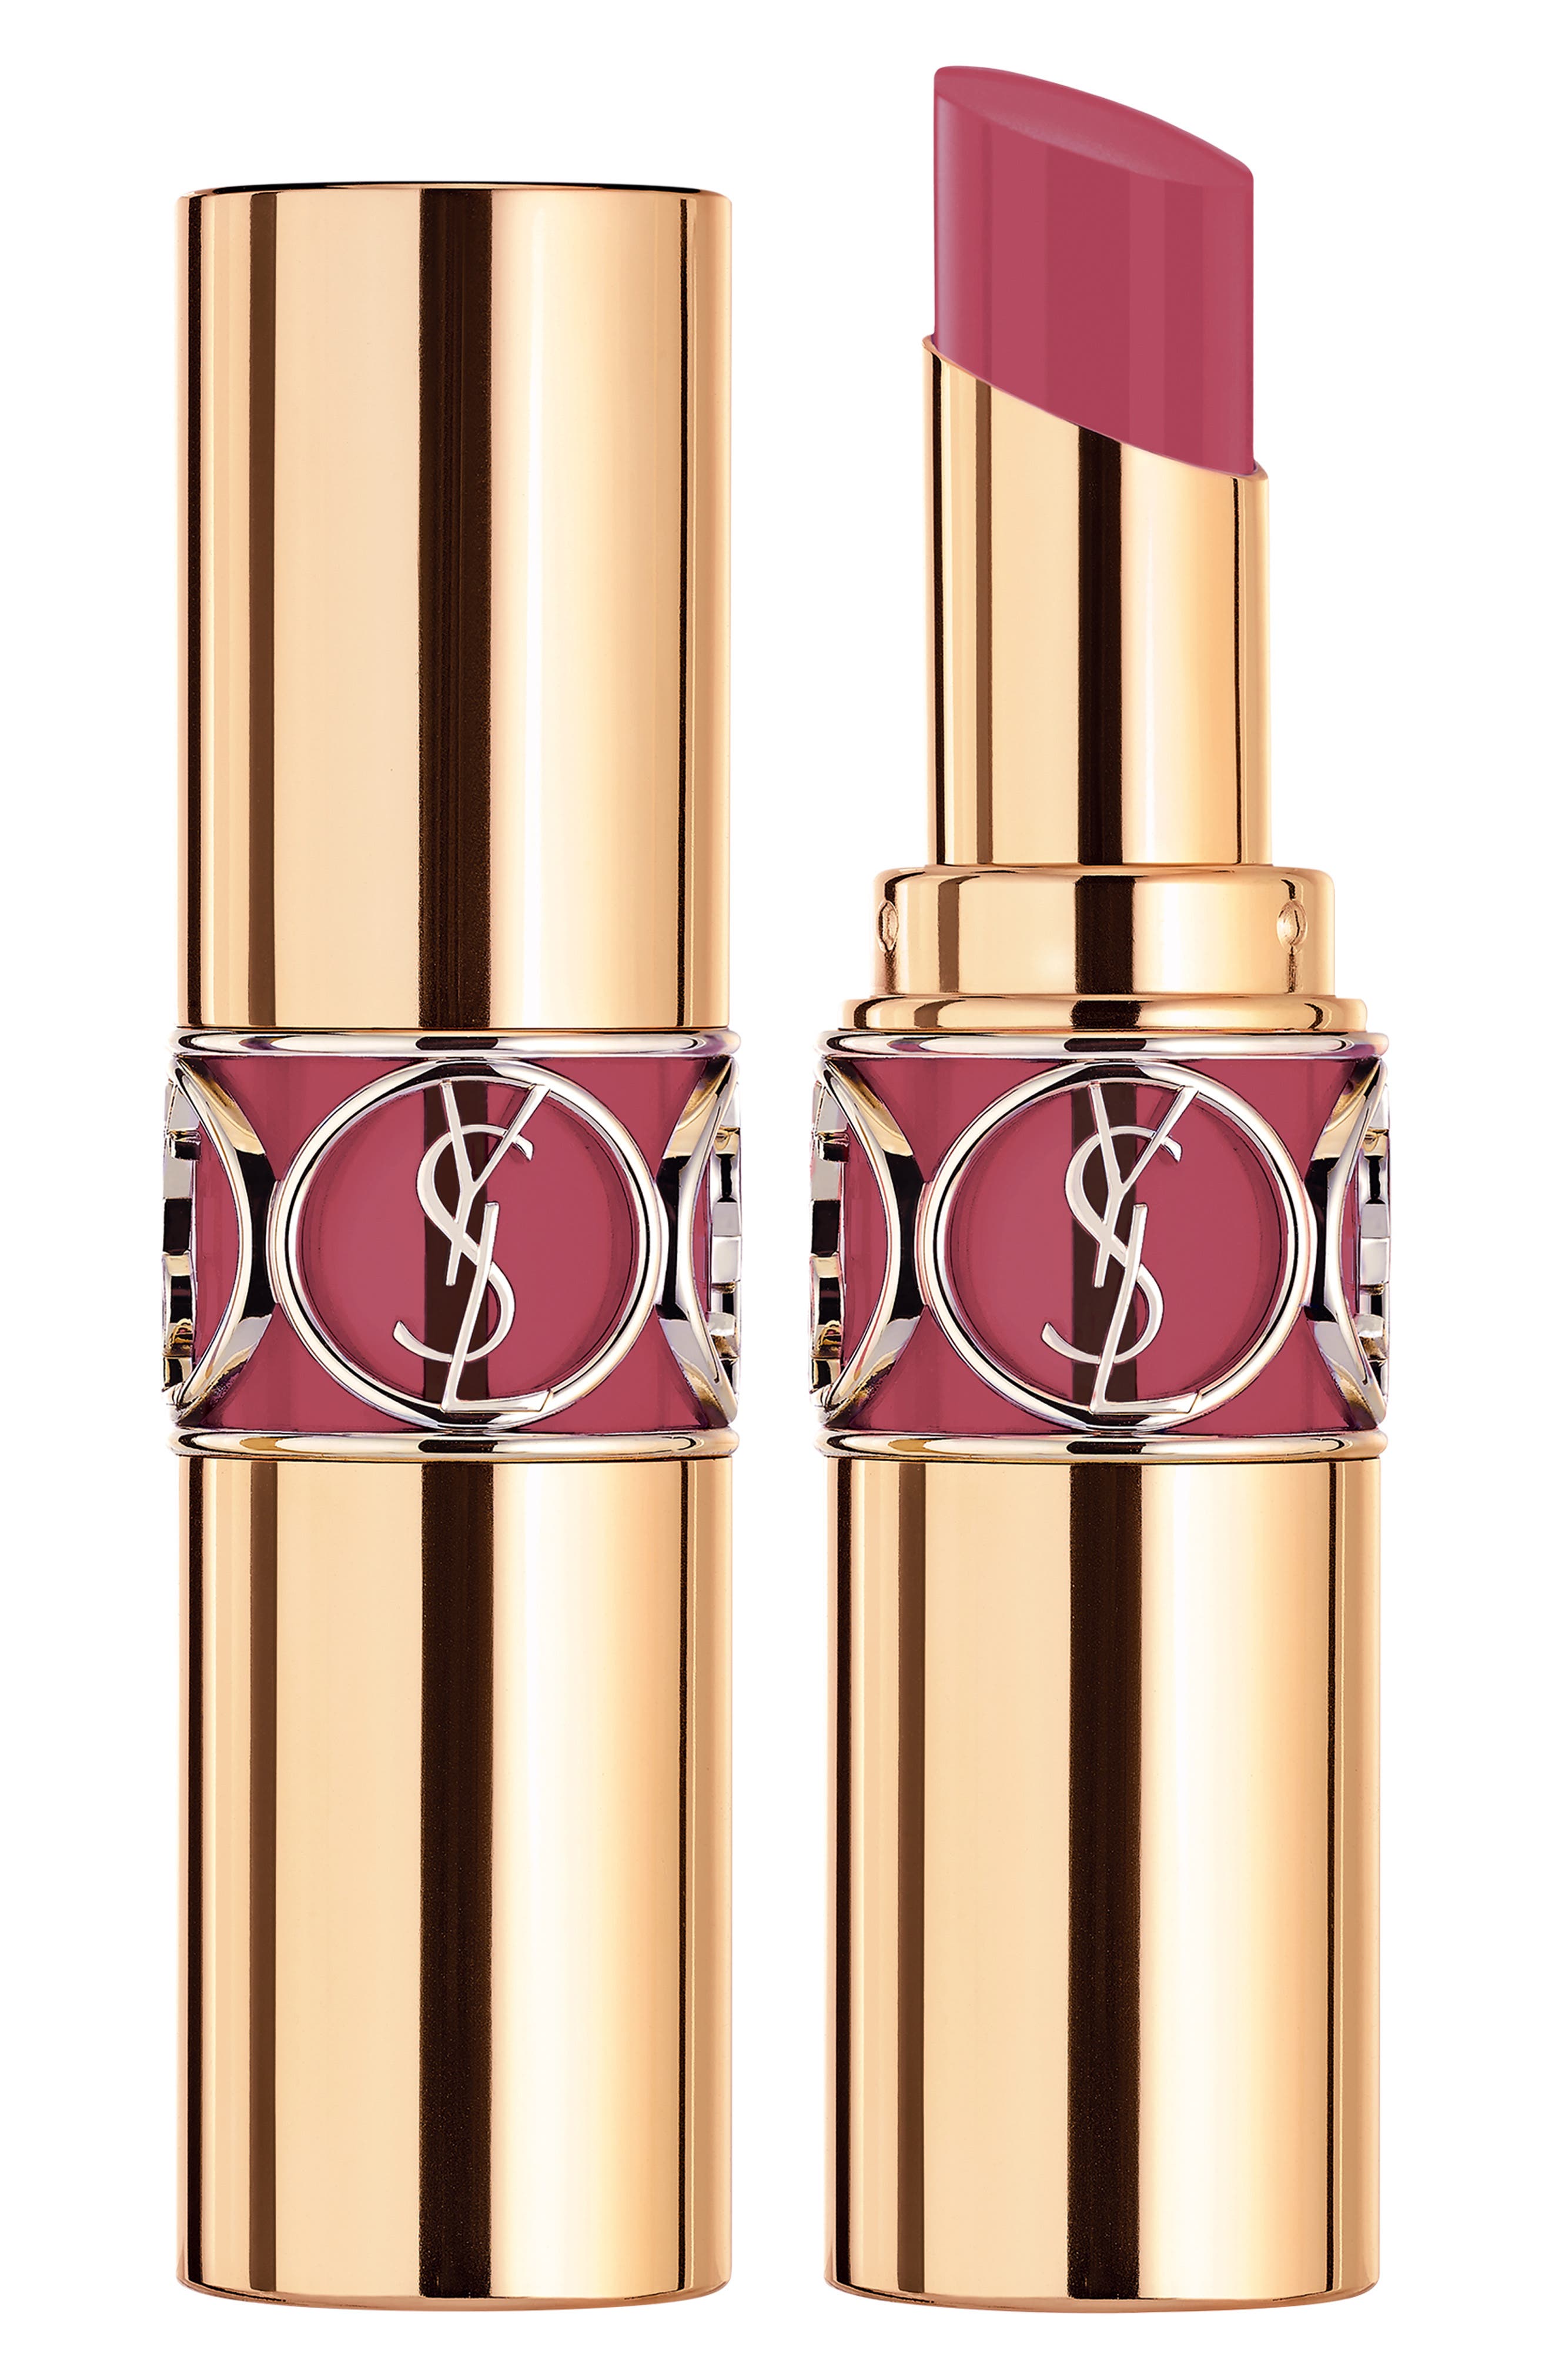 Yves Saint Laurent Rouge Volupte Shine Oil-in-Stick Lipstick Balm in Rose Loulou